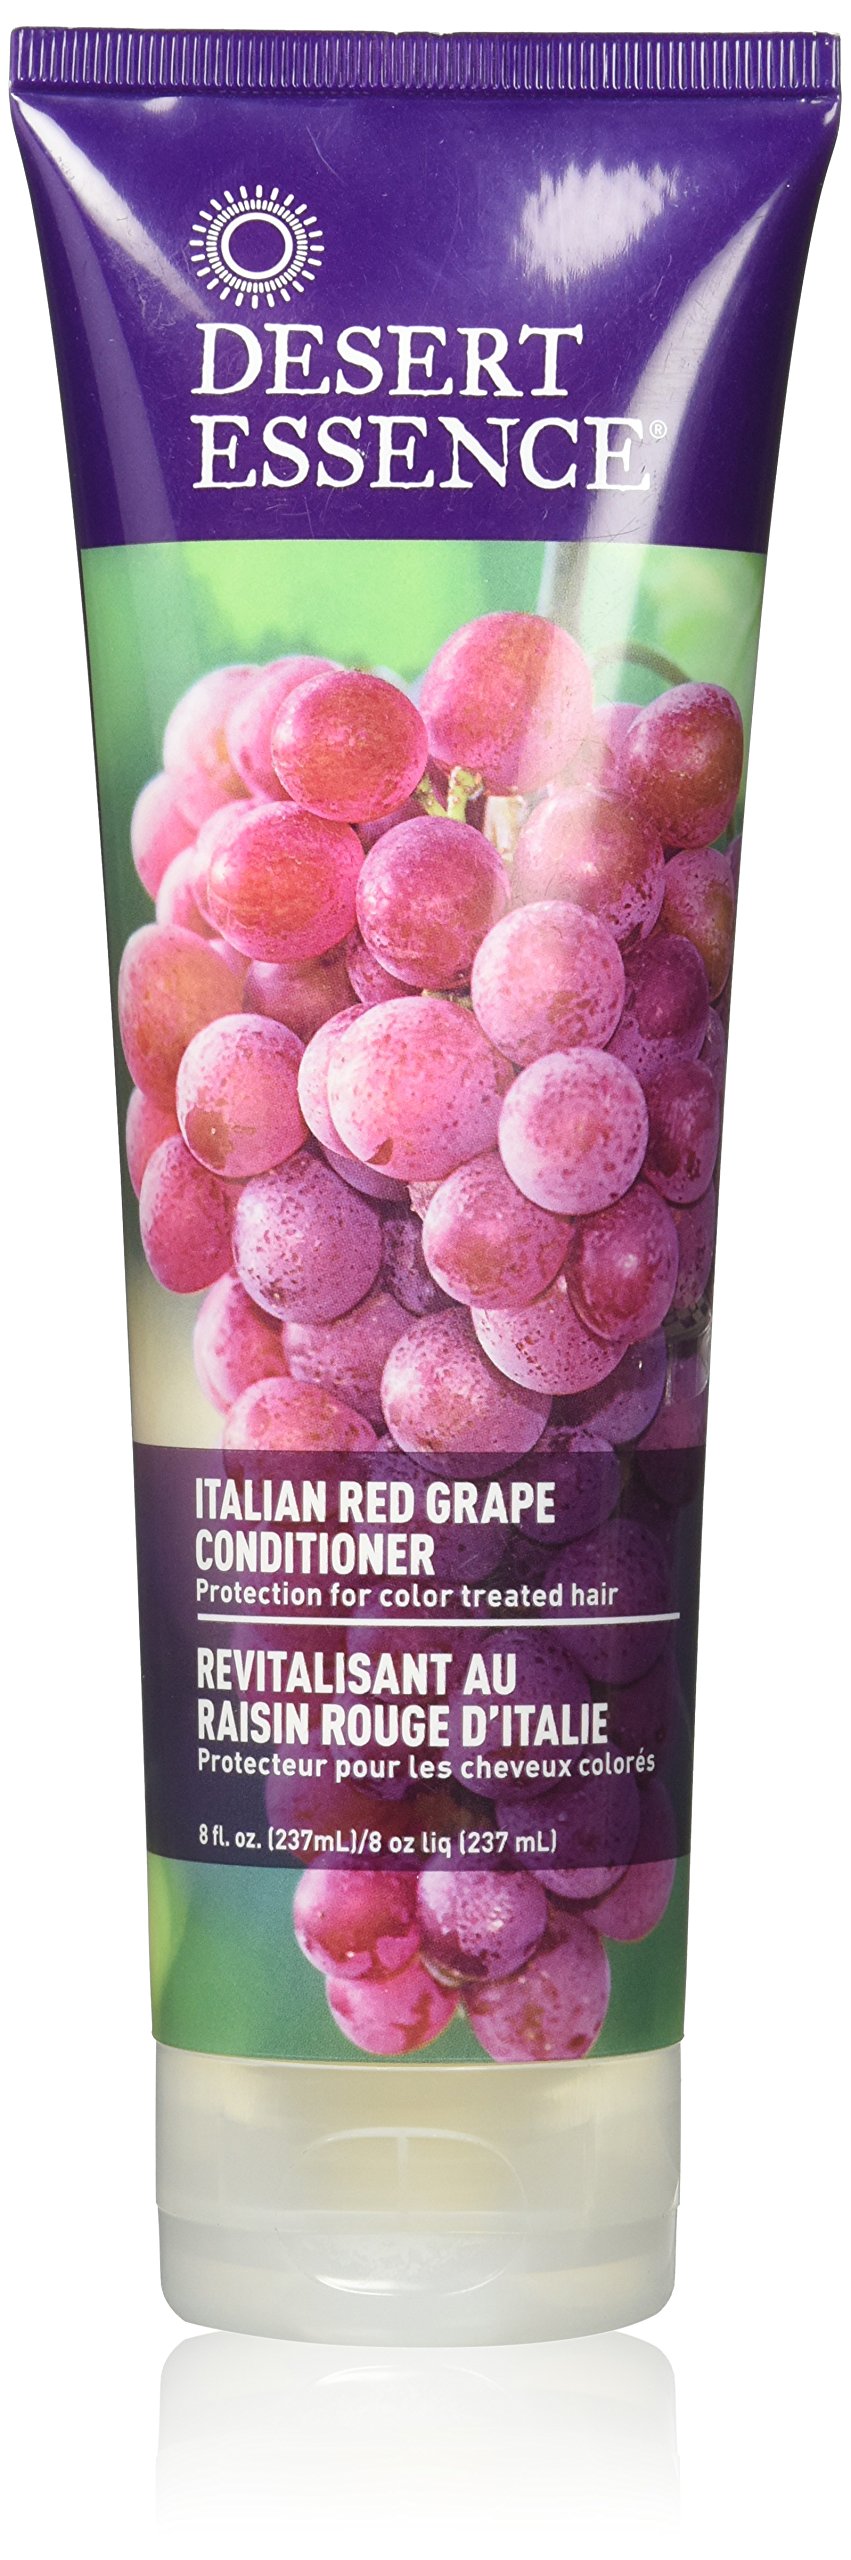 Desert Essence Italian Red Grape Conditioner - 8 Fl Ounce - Protection For Color Treated Hair - Moisturizes - Smooth & Silky - Vitamin B5 - Grape Seed Extract - Antioxidant With Resveratrol